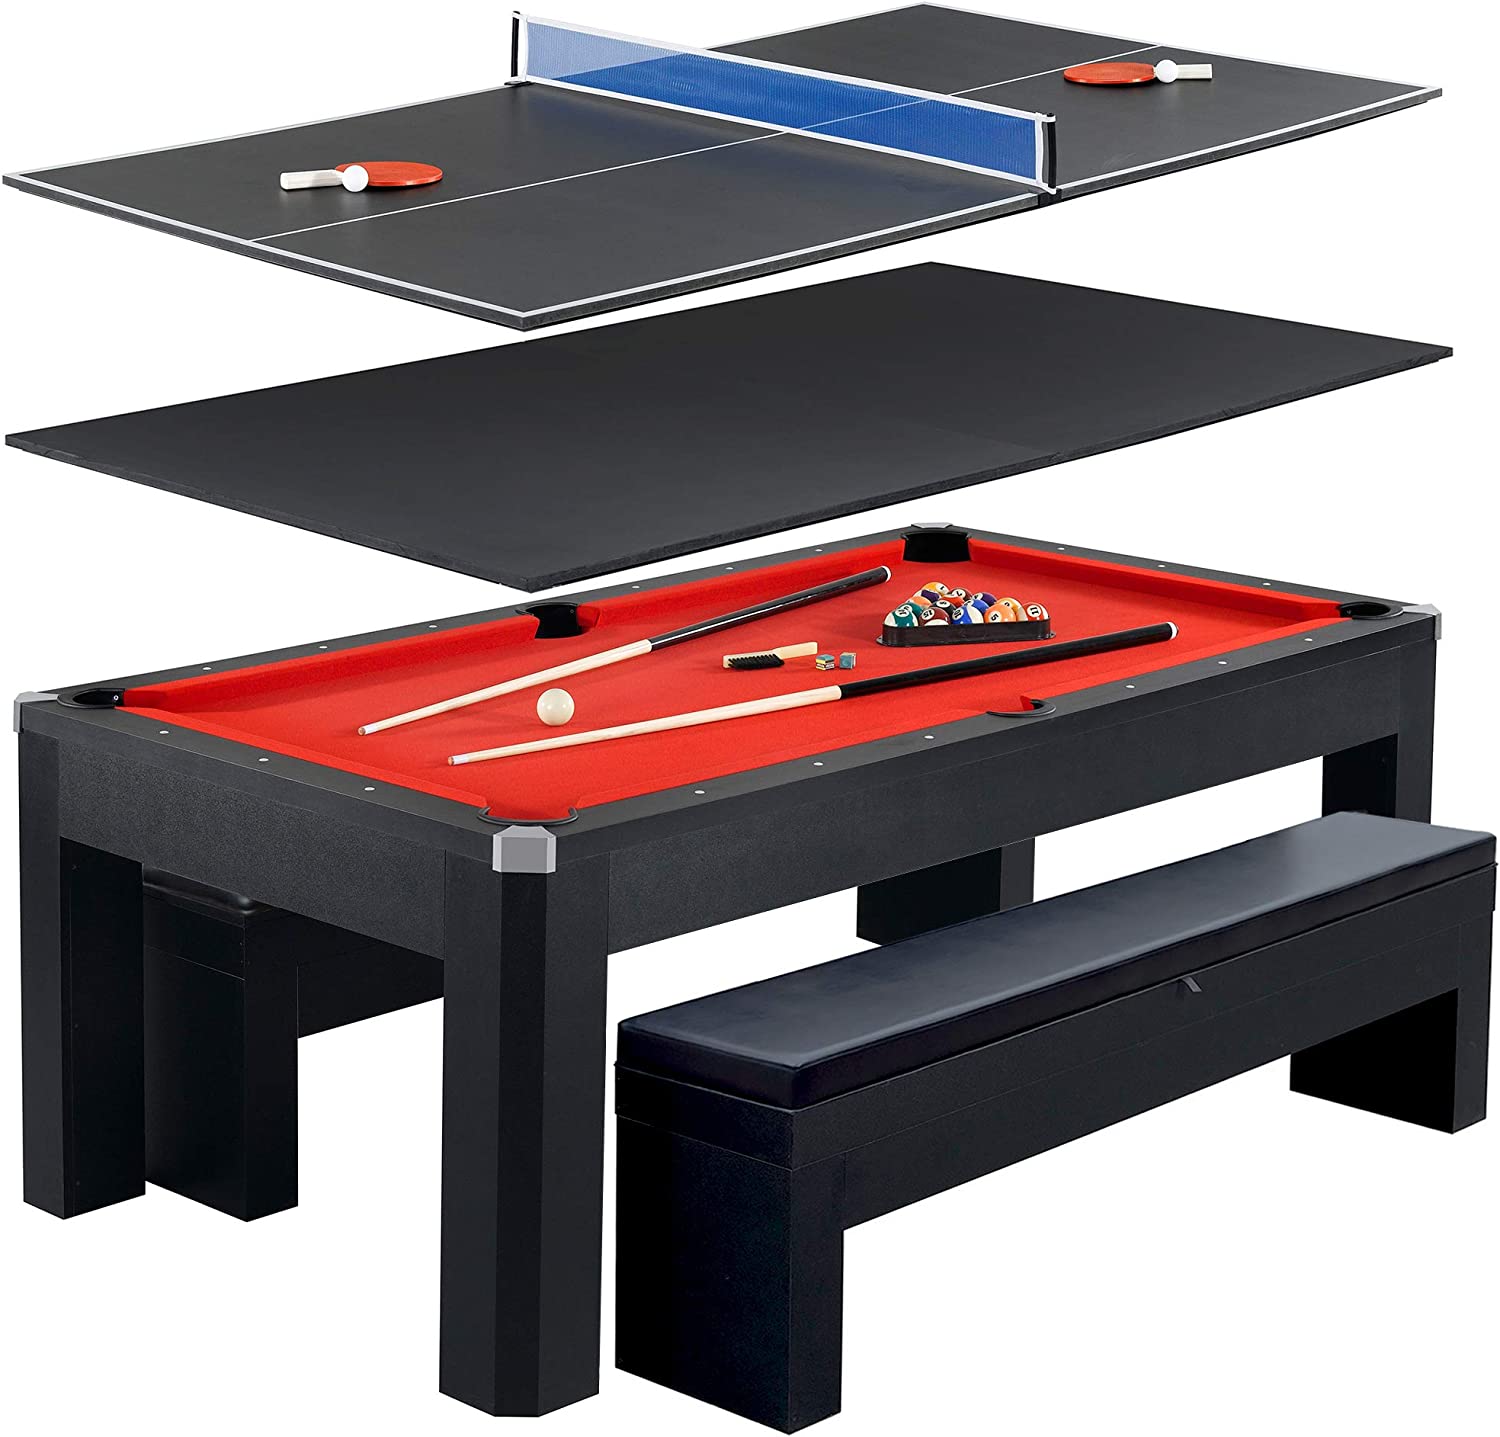 Hathaway Park Avenue 7√É¬¢√¢‚Äö¬¨√¢‚Äû¬¢ Pool Table Tennis Combination with Dining Top, Two Storage Benches, Free Accessories